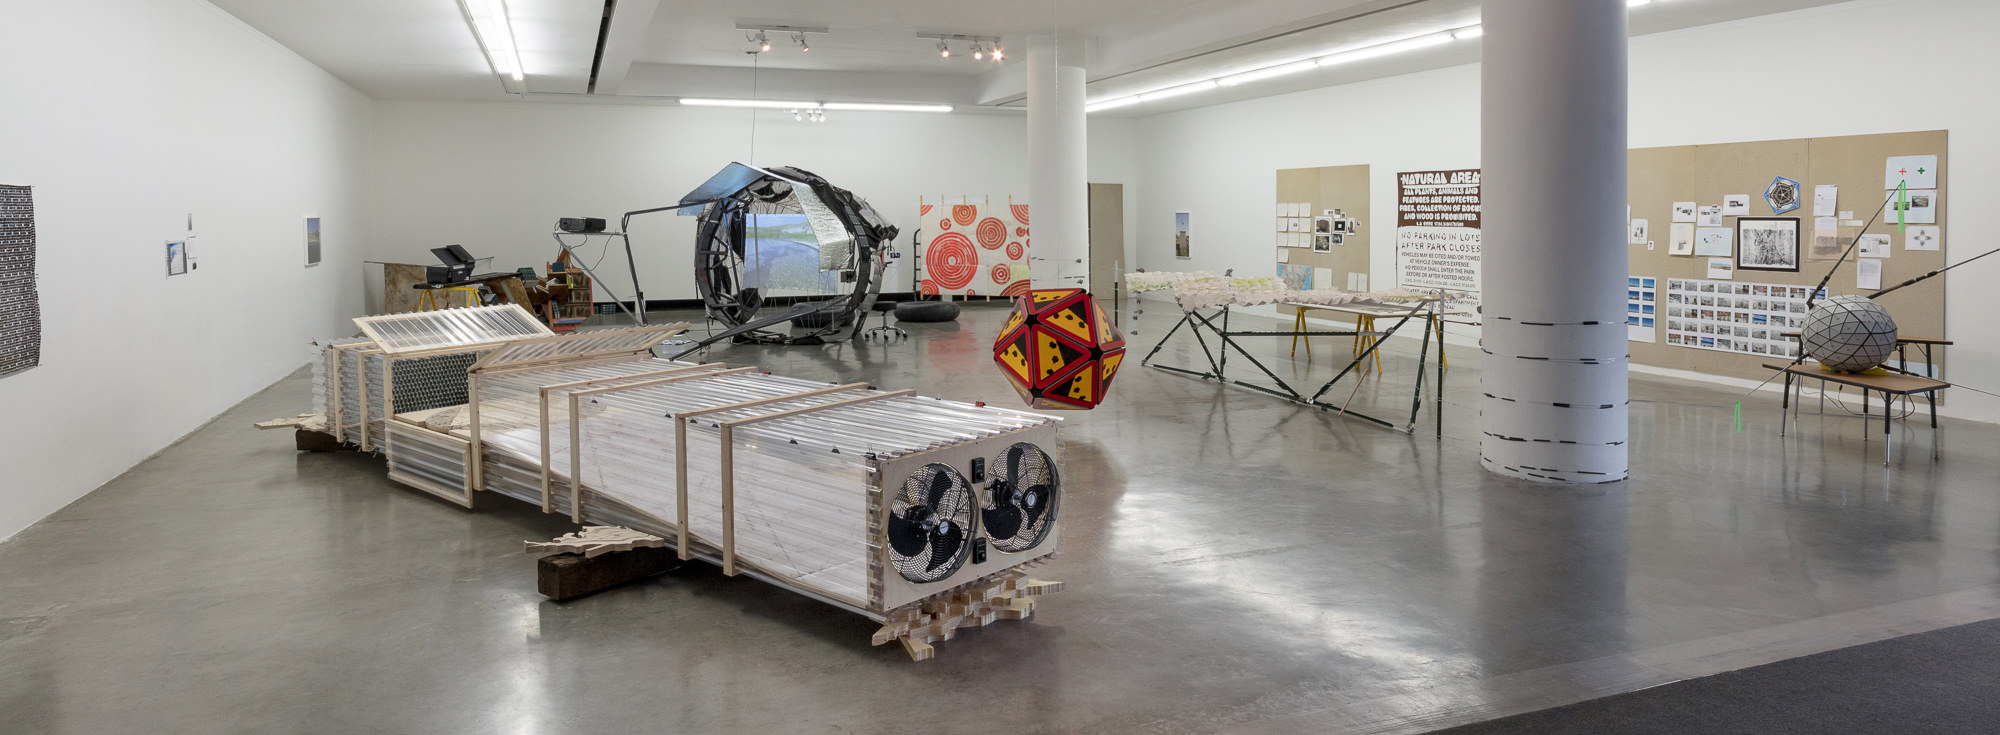  Installation view with Huerfano Proposal (Section 16, T 26 S/R 66 W), 2018. Photo: Brica Wilcox